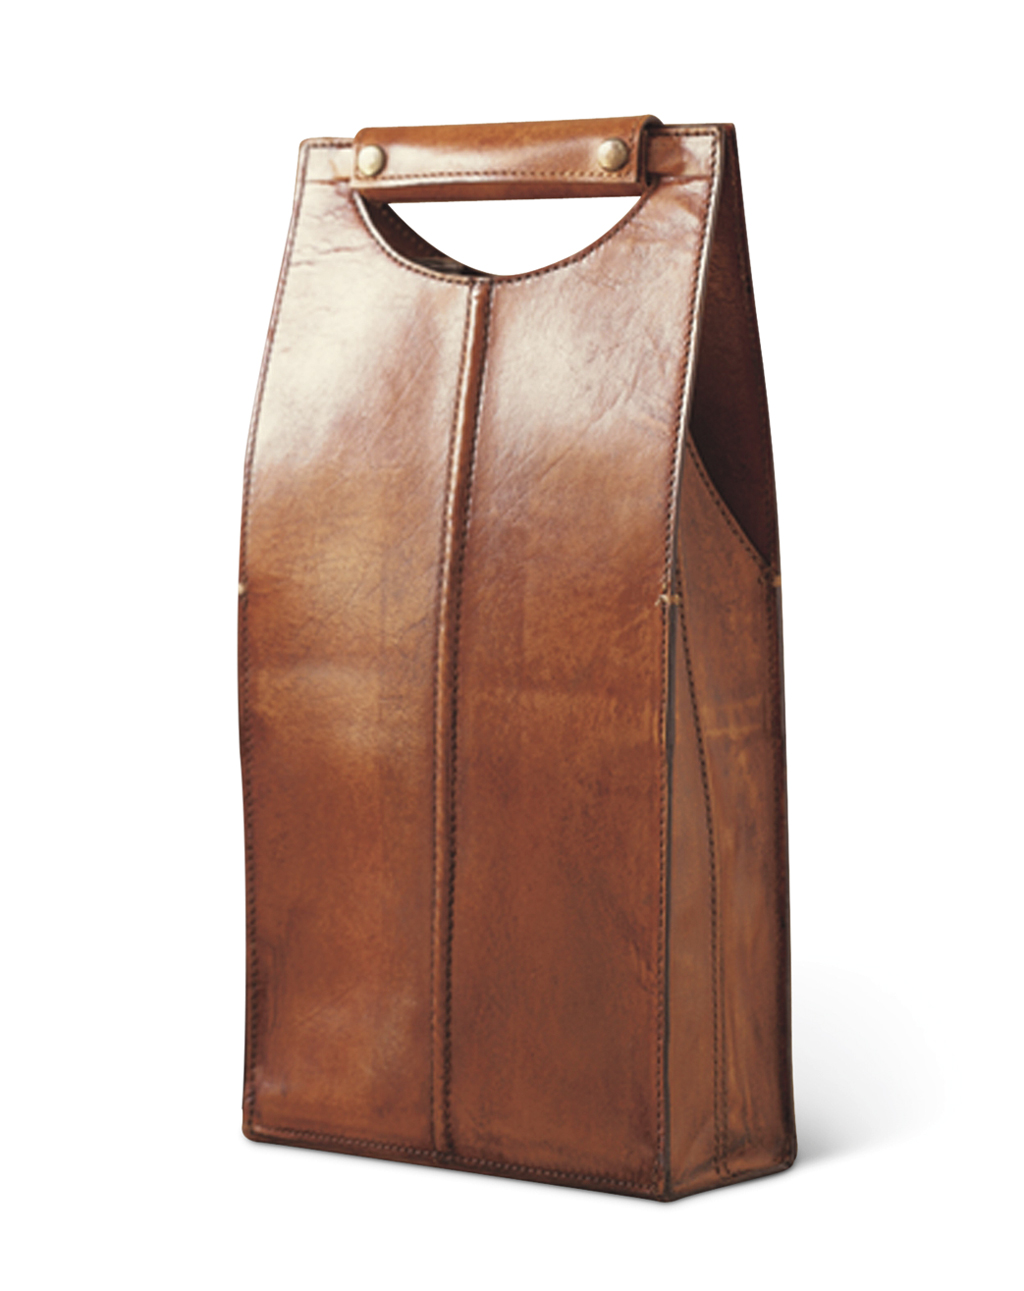 a brown leather wine carrier